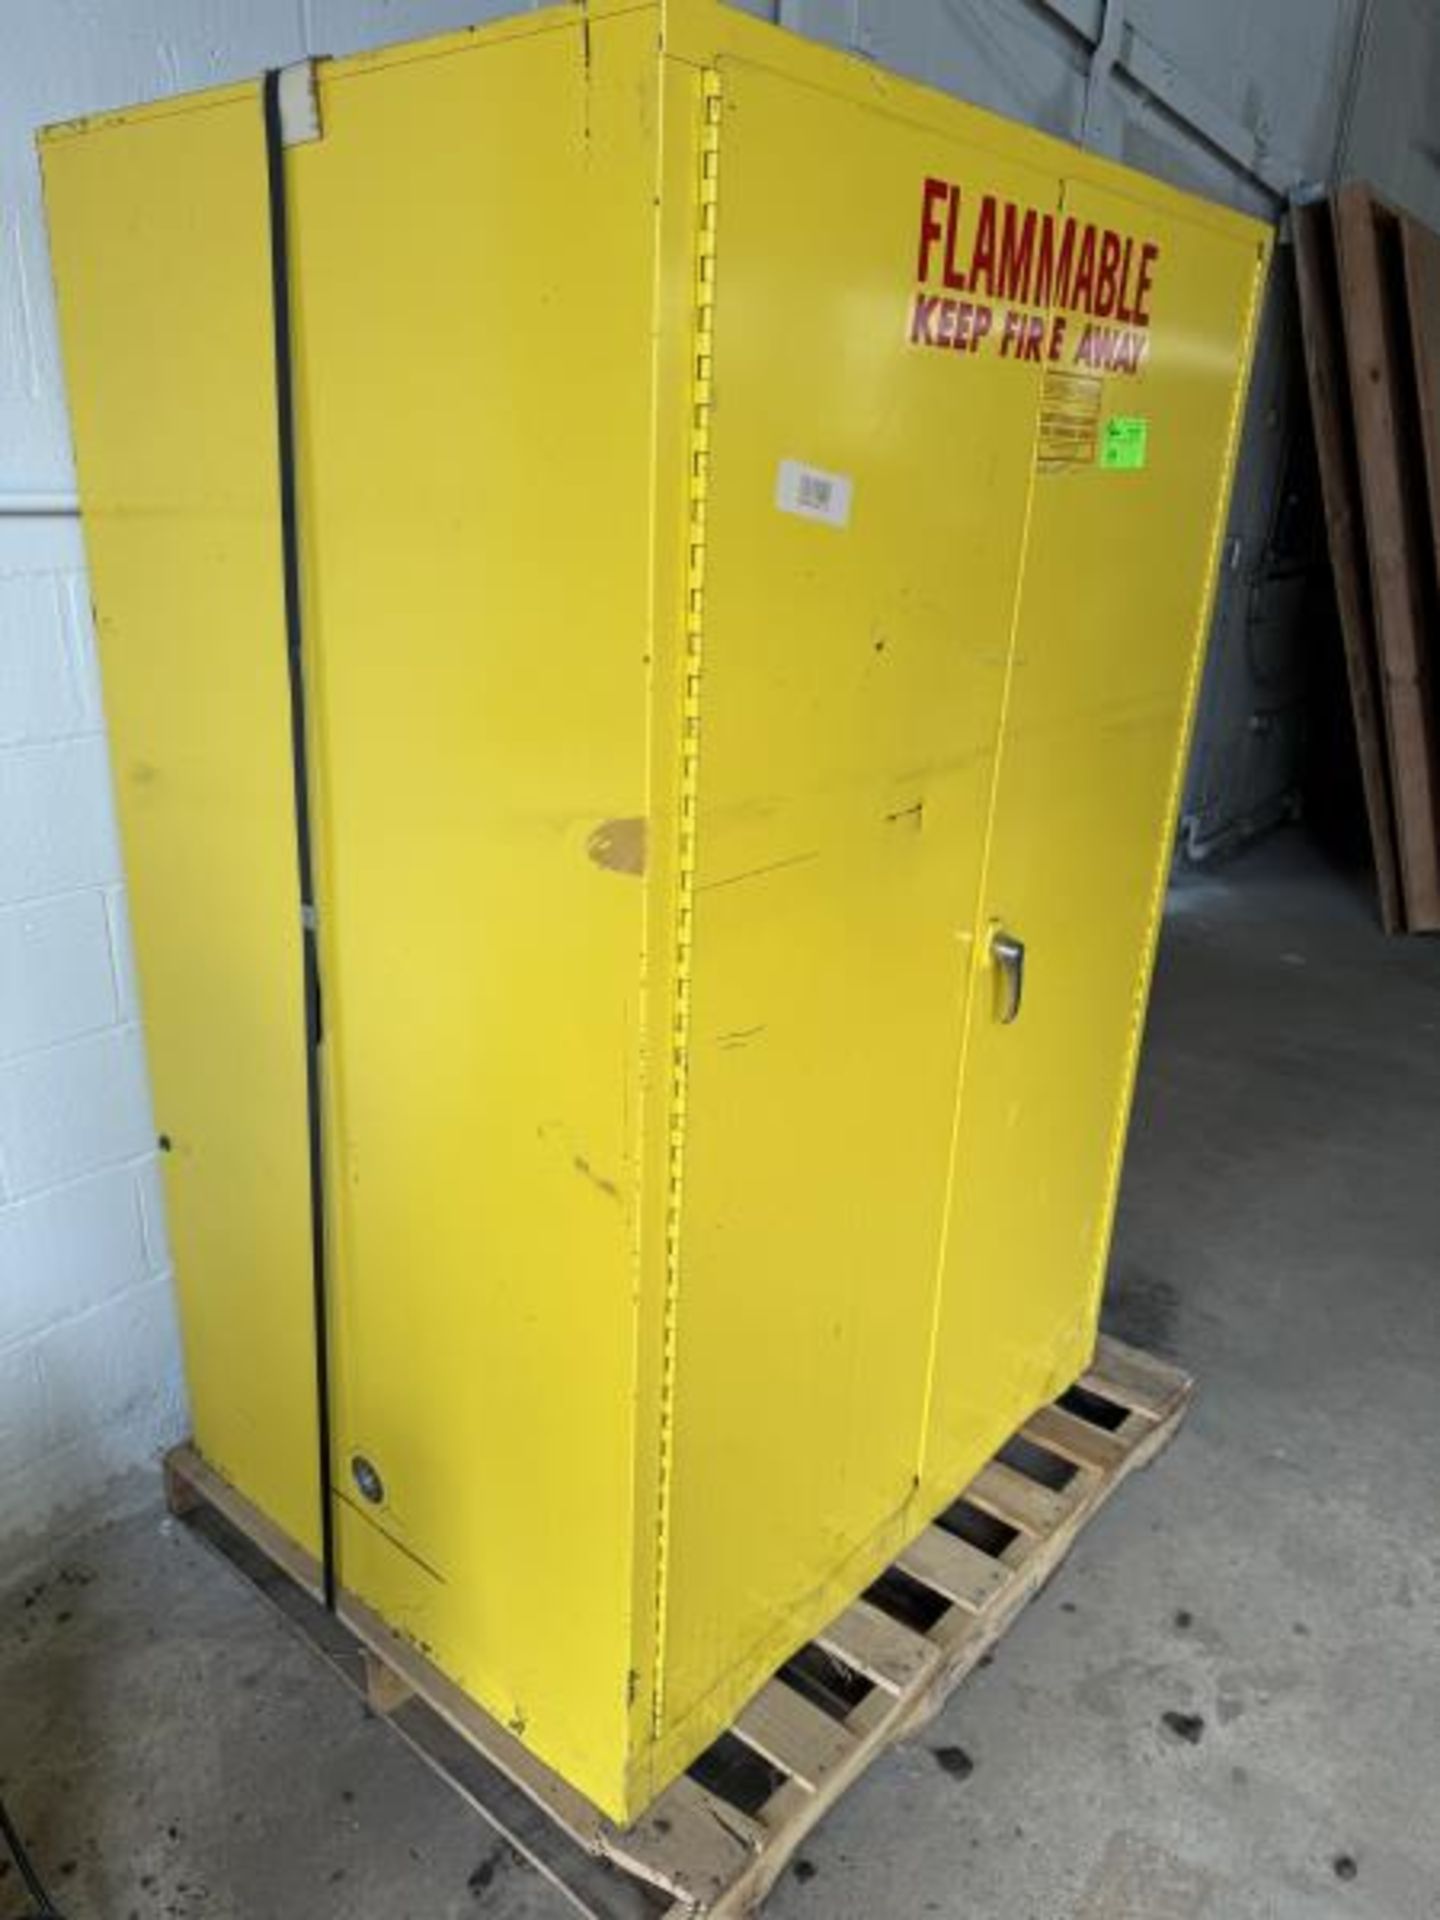 SE-CUR-AU Cabinet Safety Storage Cabinet Flammable Liquids 43" wide x 34" deep x 64" tall - Image 4 of 4